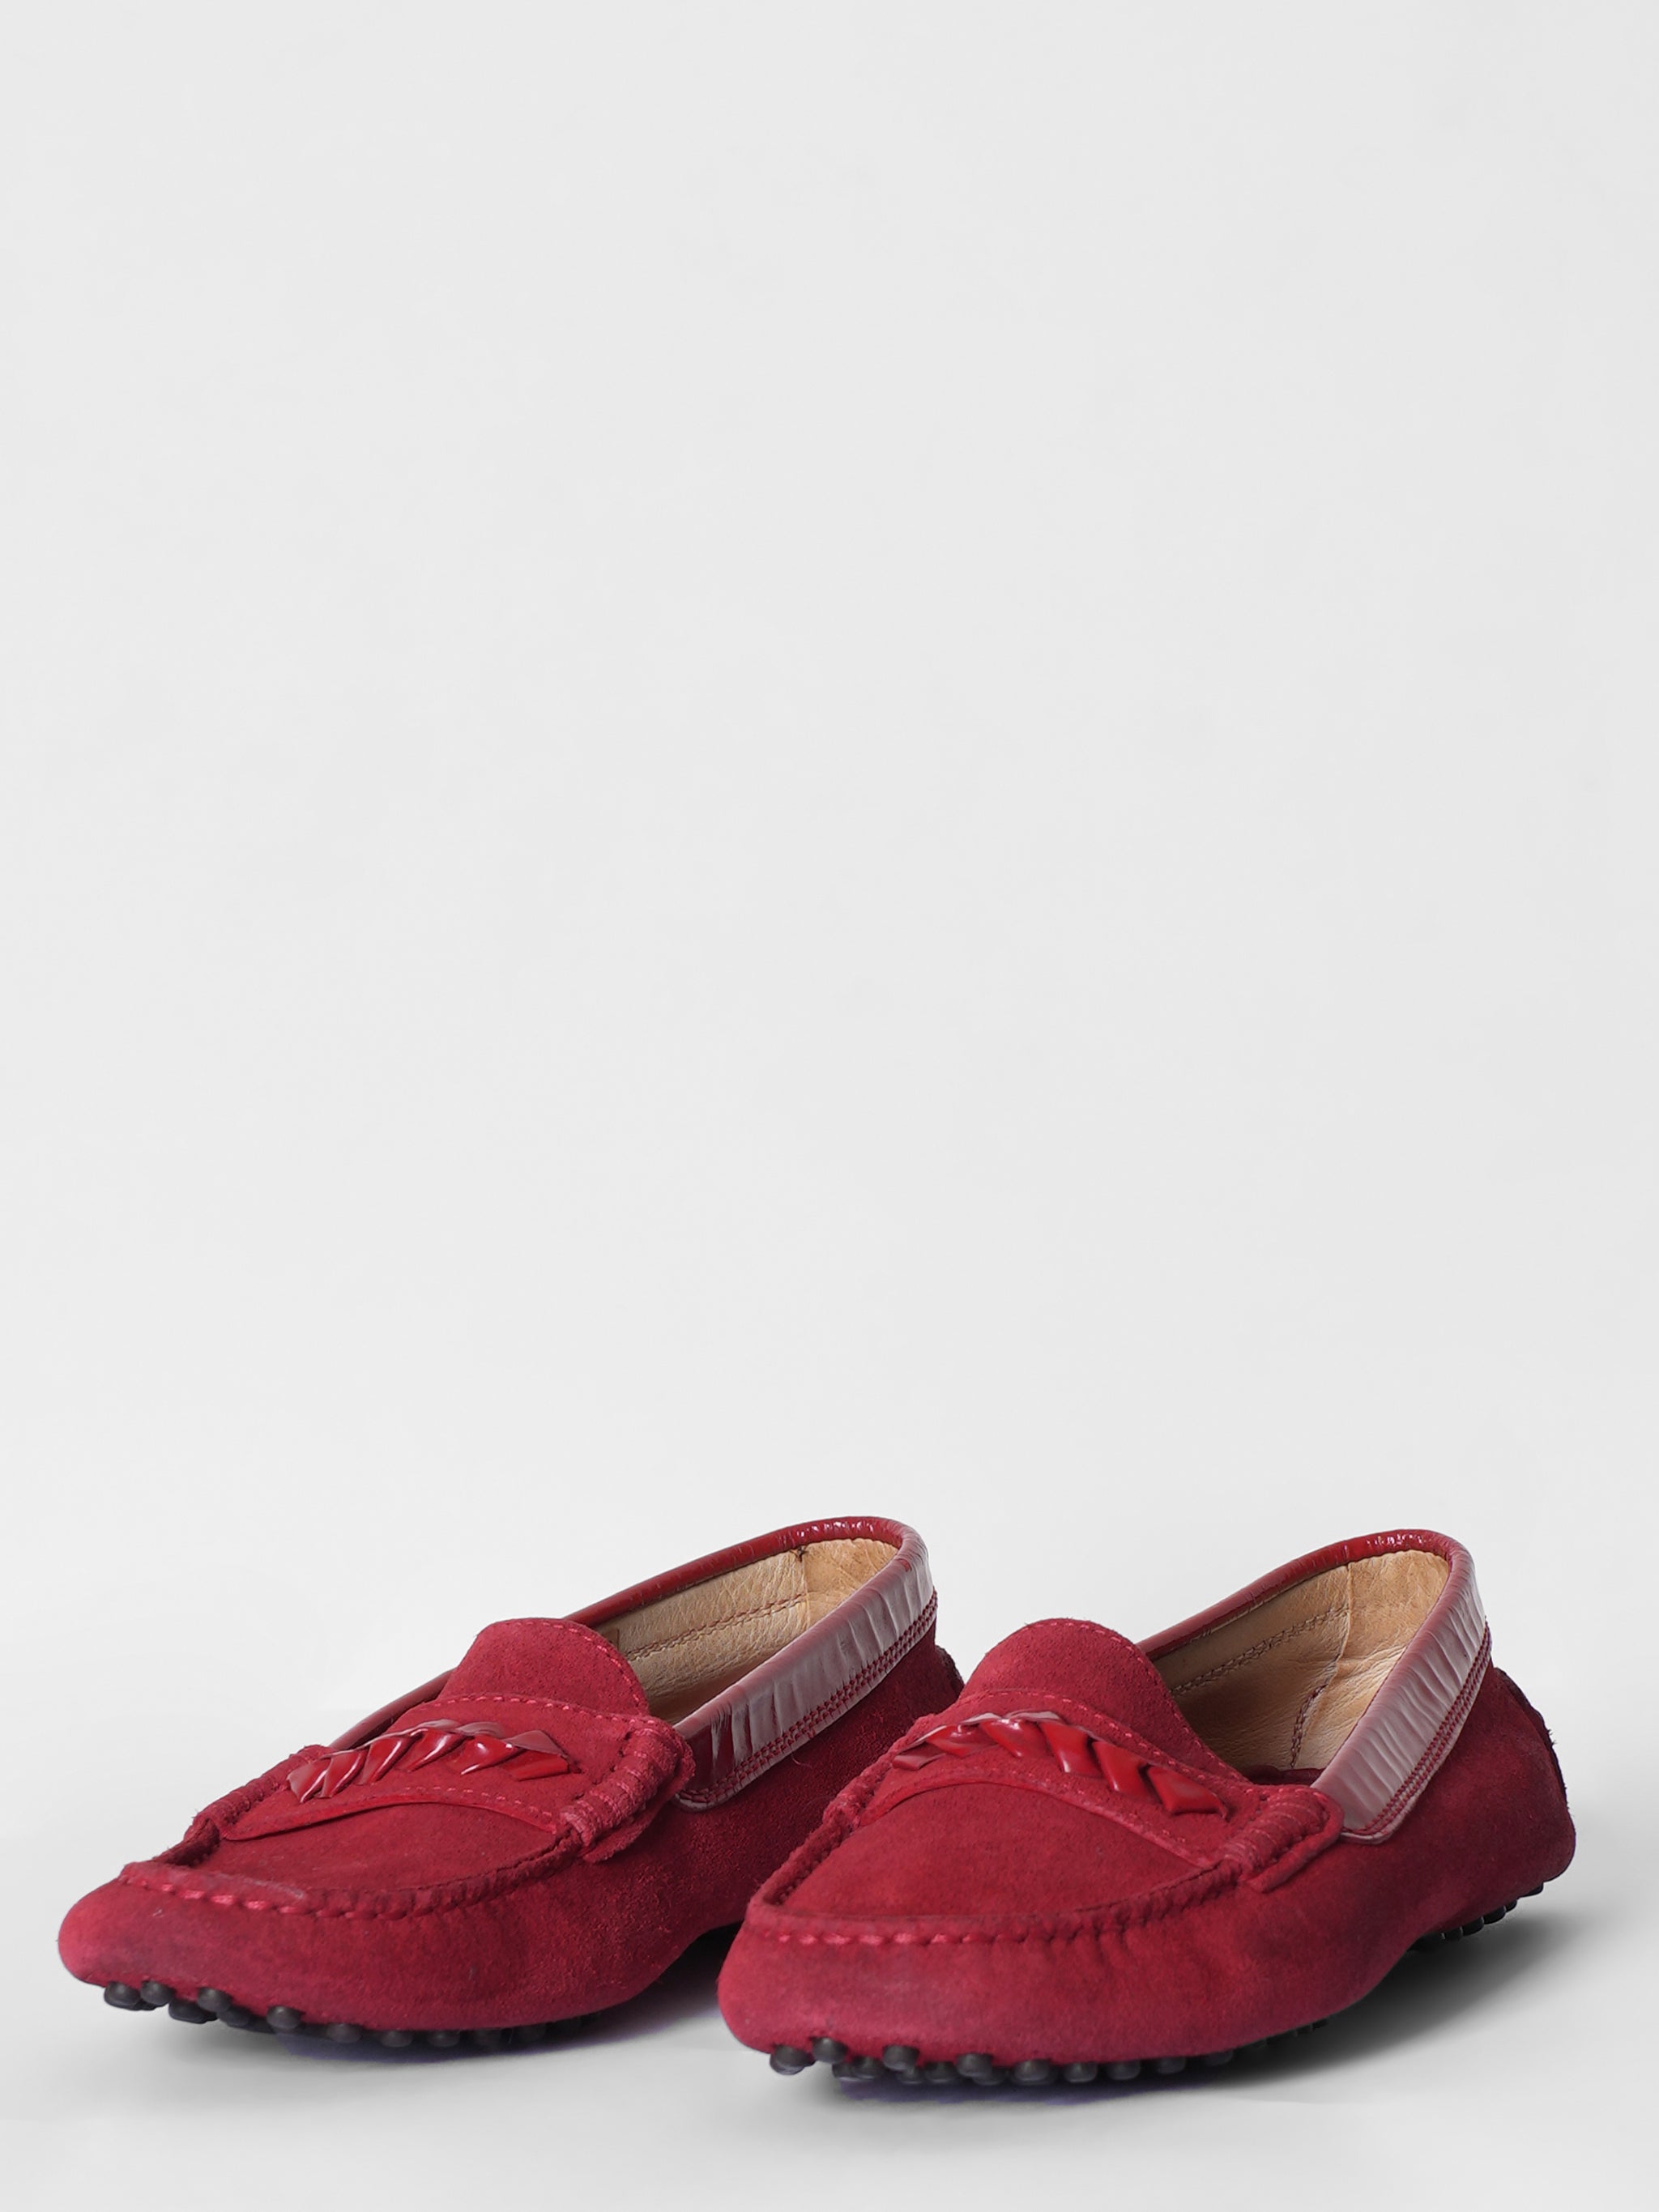 New Tod's Women Red Loafers